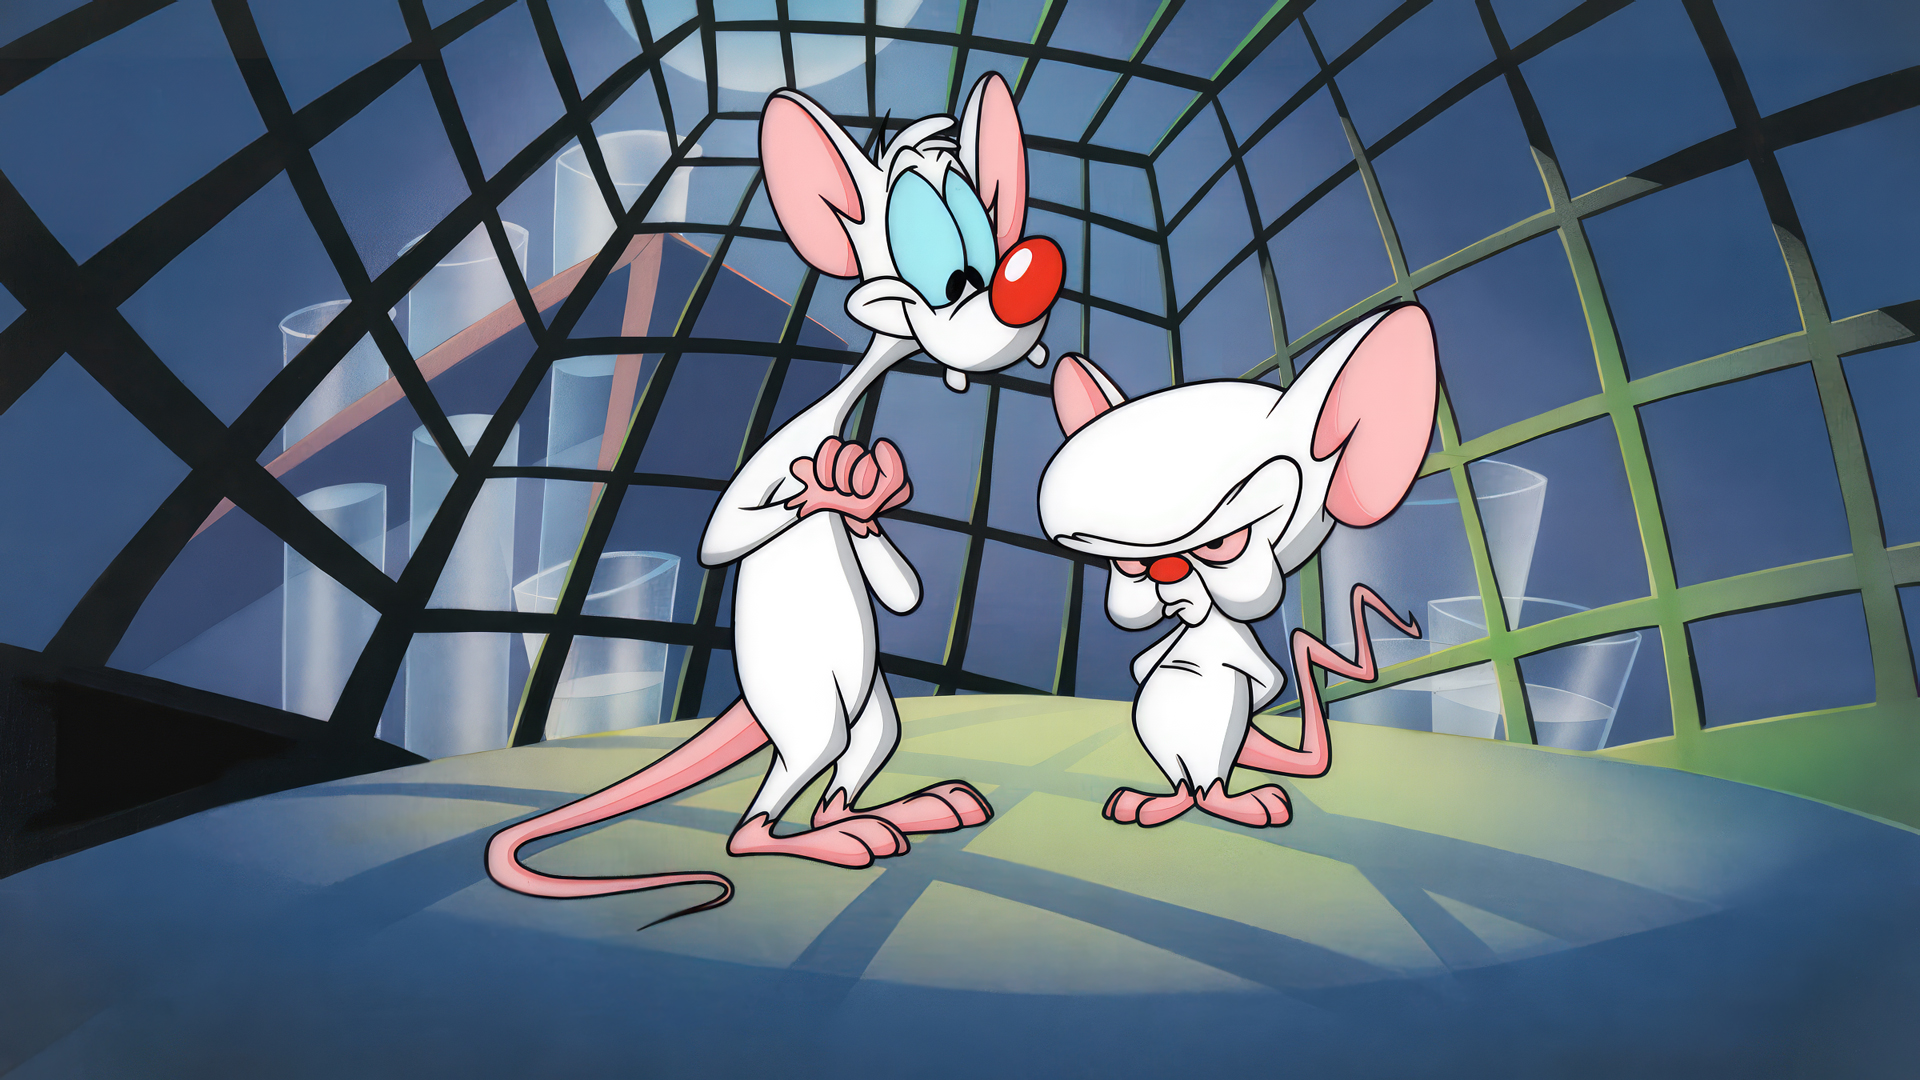 Pinky And The Brain Animation Animated Series Cartoon Mouse Animal Laboratories Cages Warner Brother 1920x1080